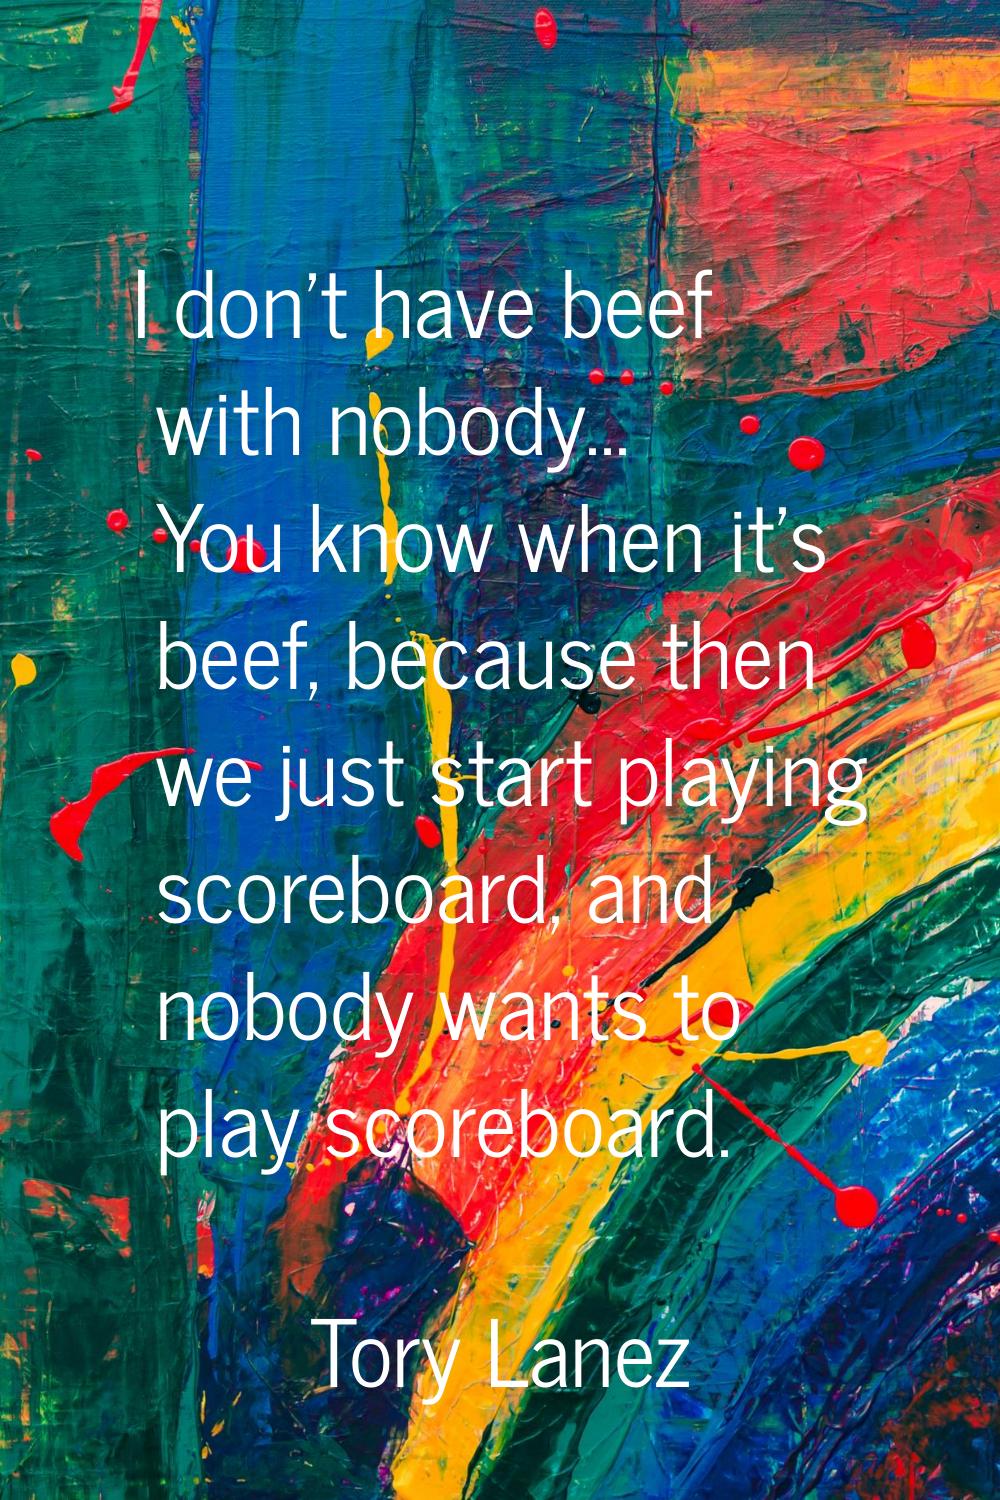 I don't have beef with nobody... You know when it's beef, because then we just start playing scoreb